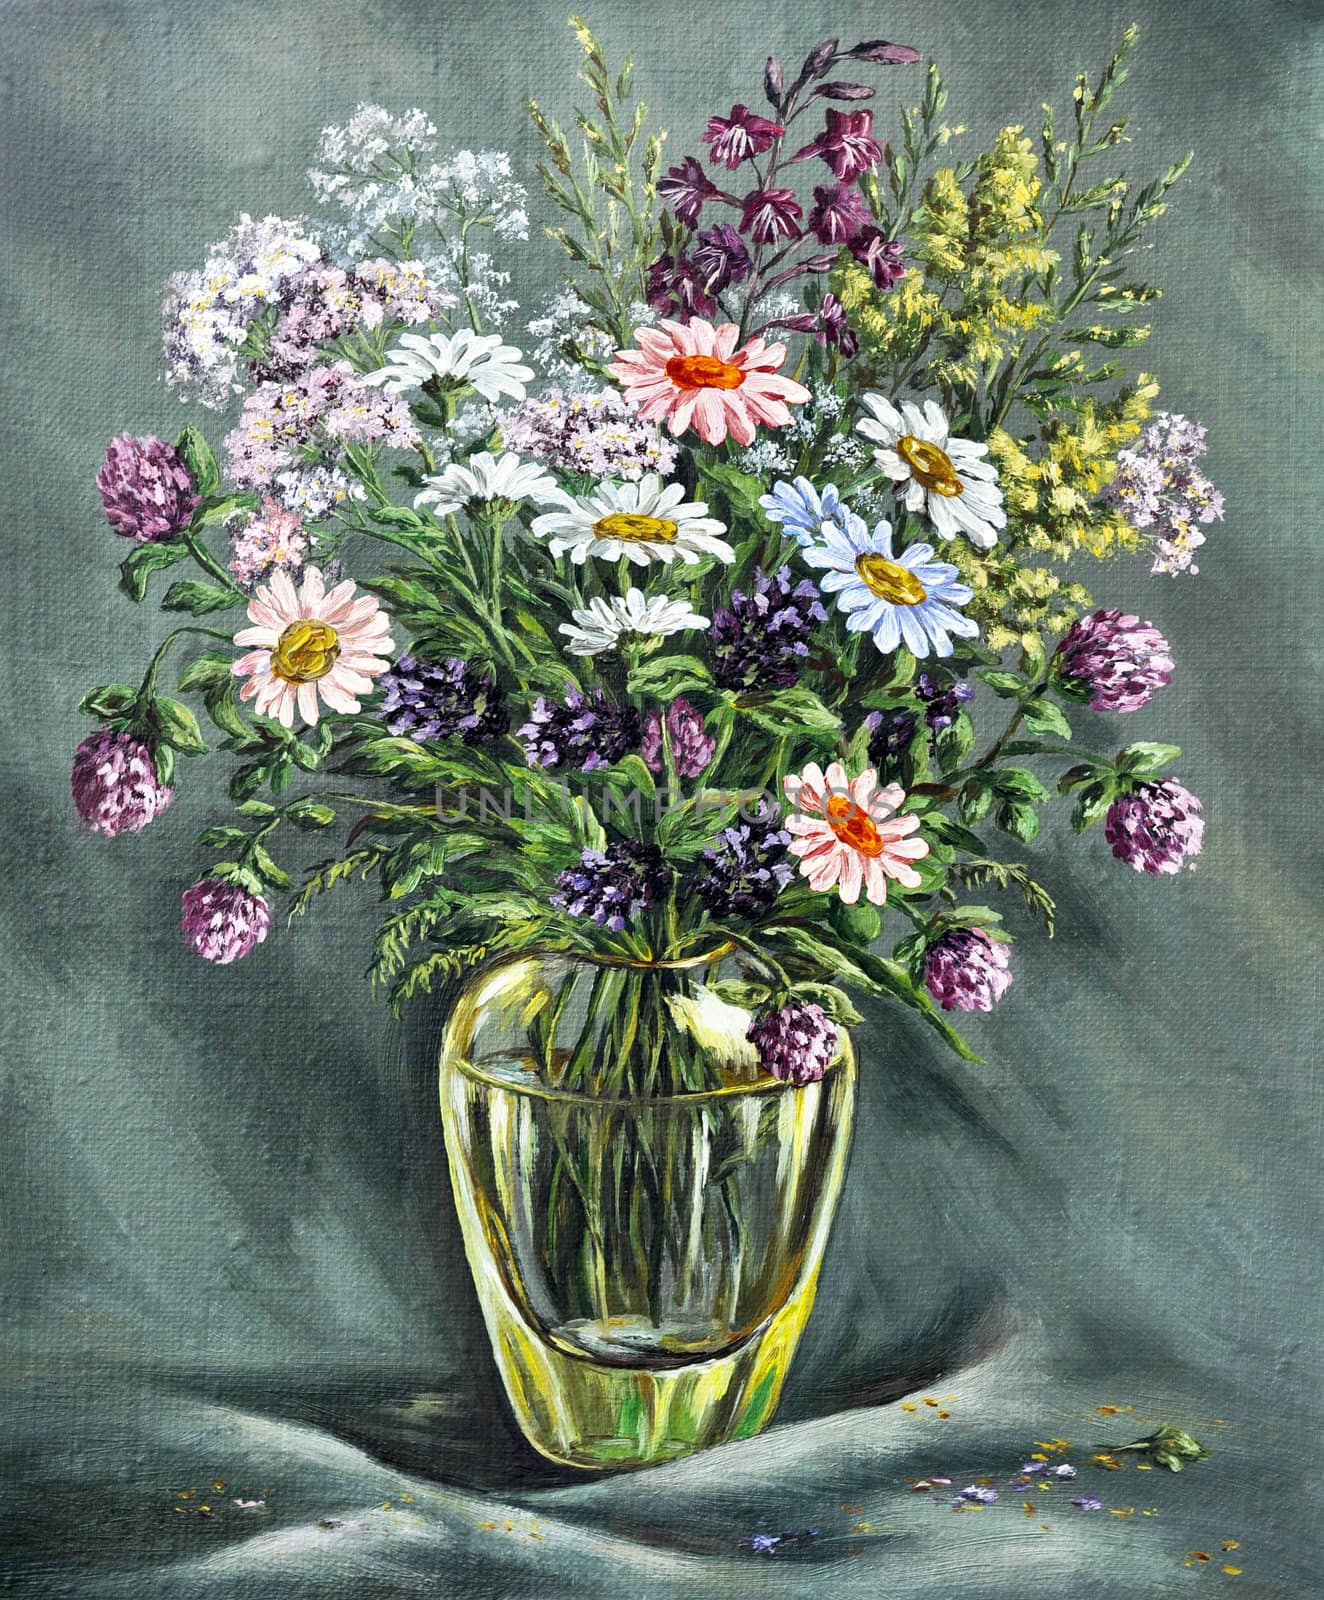 Glass vase with wild flowers by alexcoolok